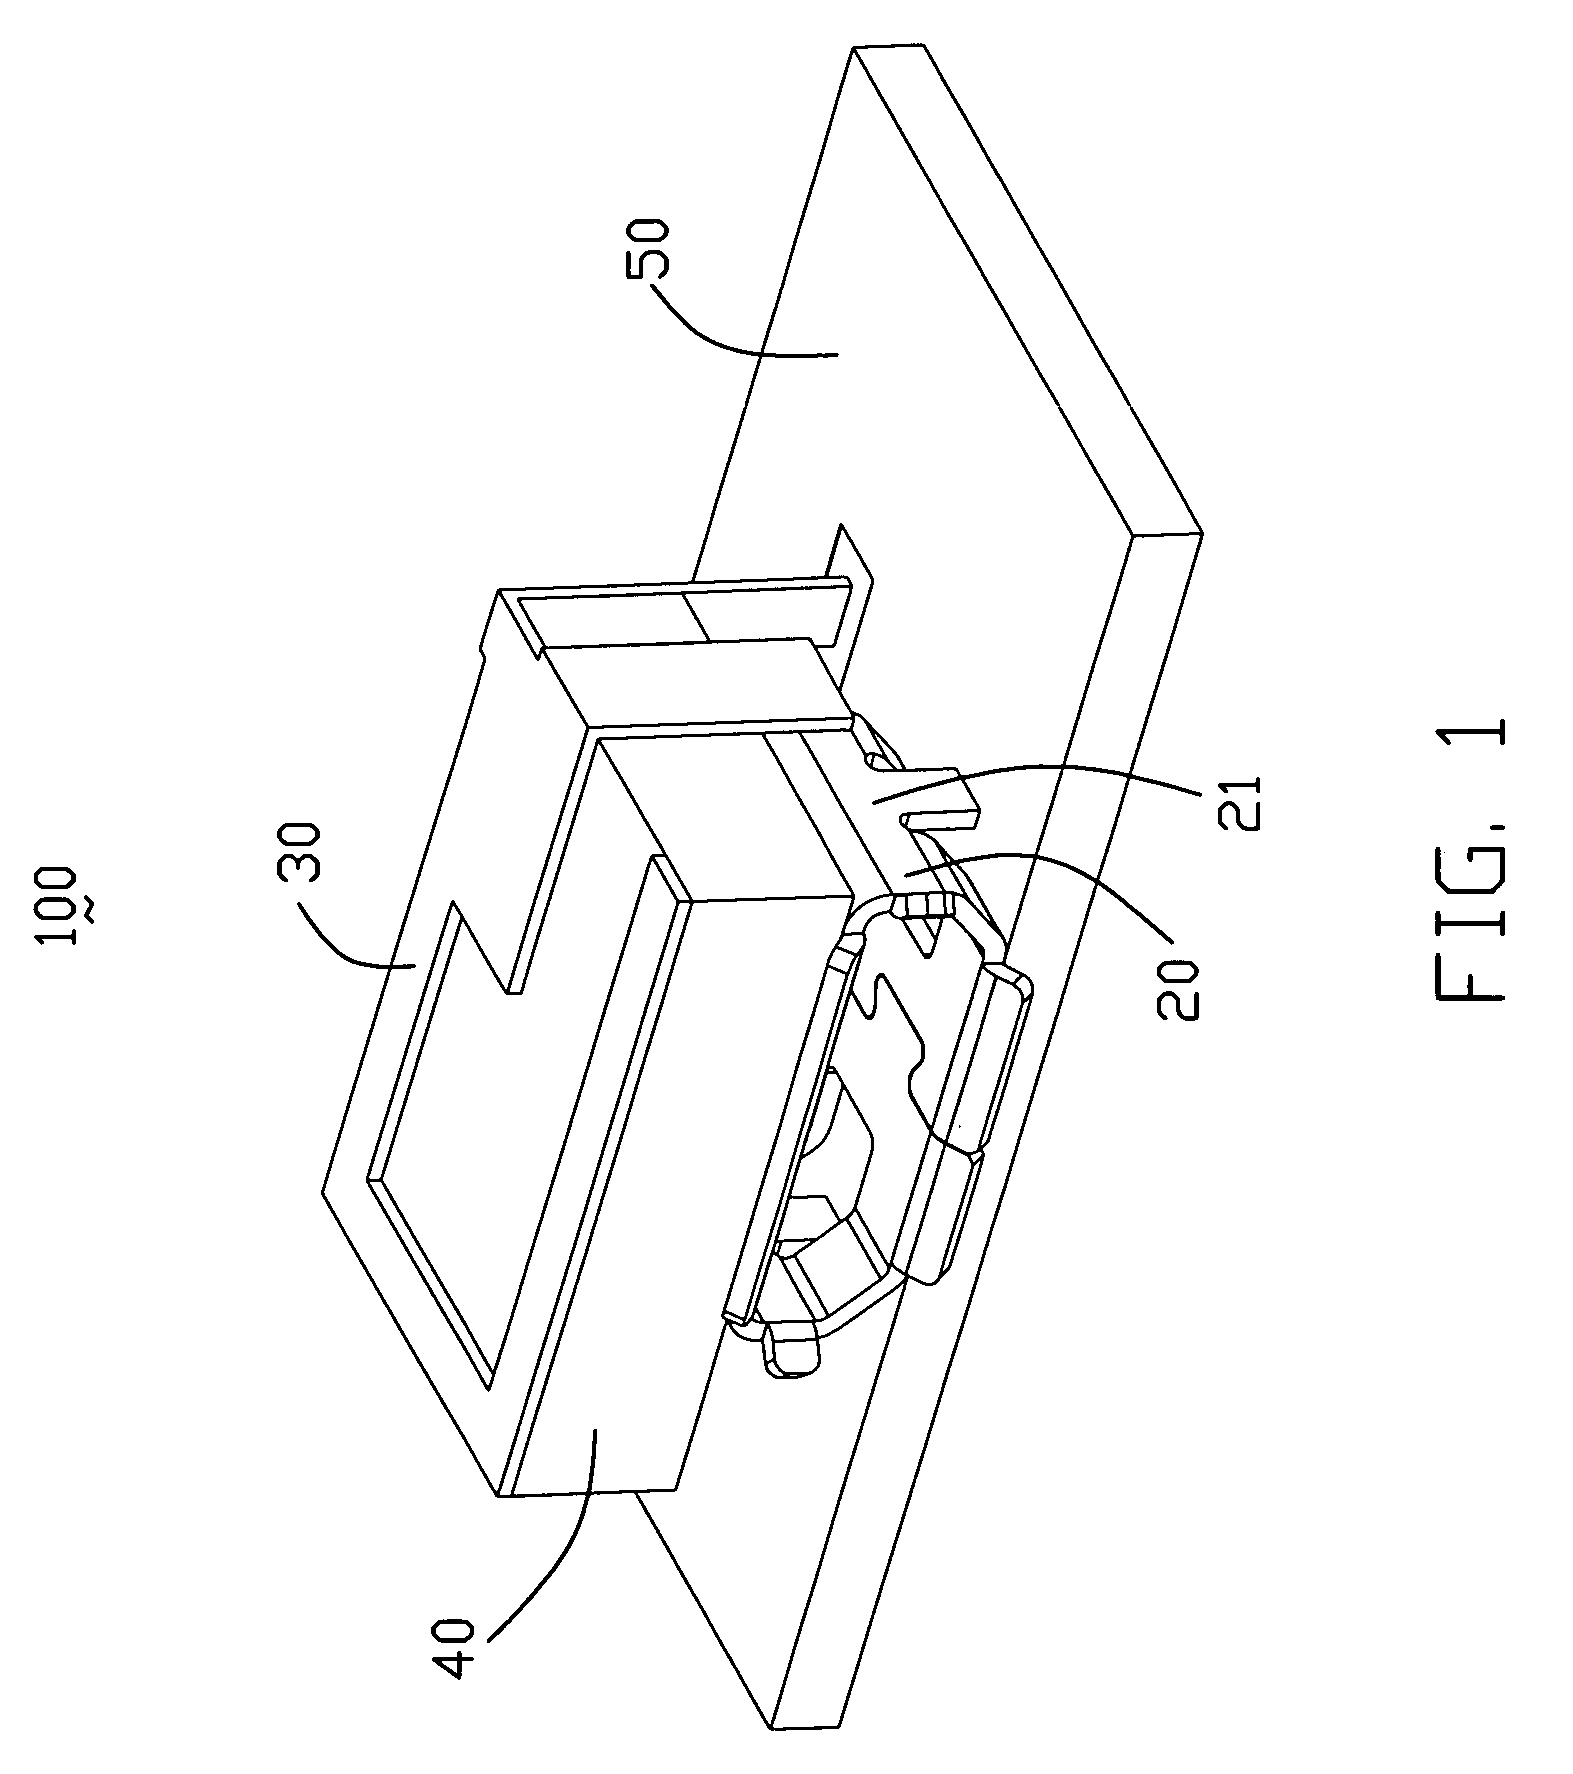 Electrical connector assembly with antenna function